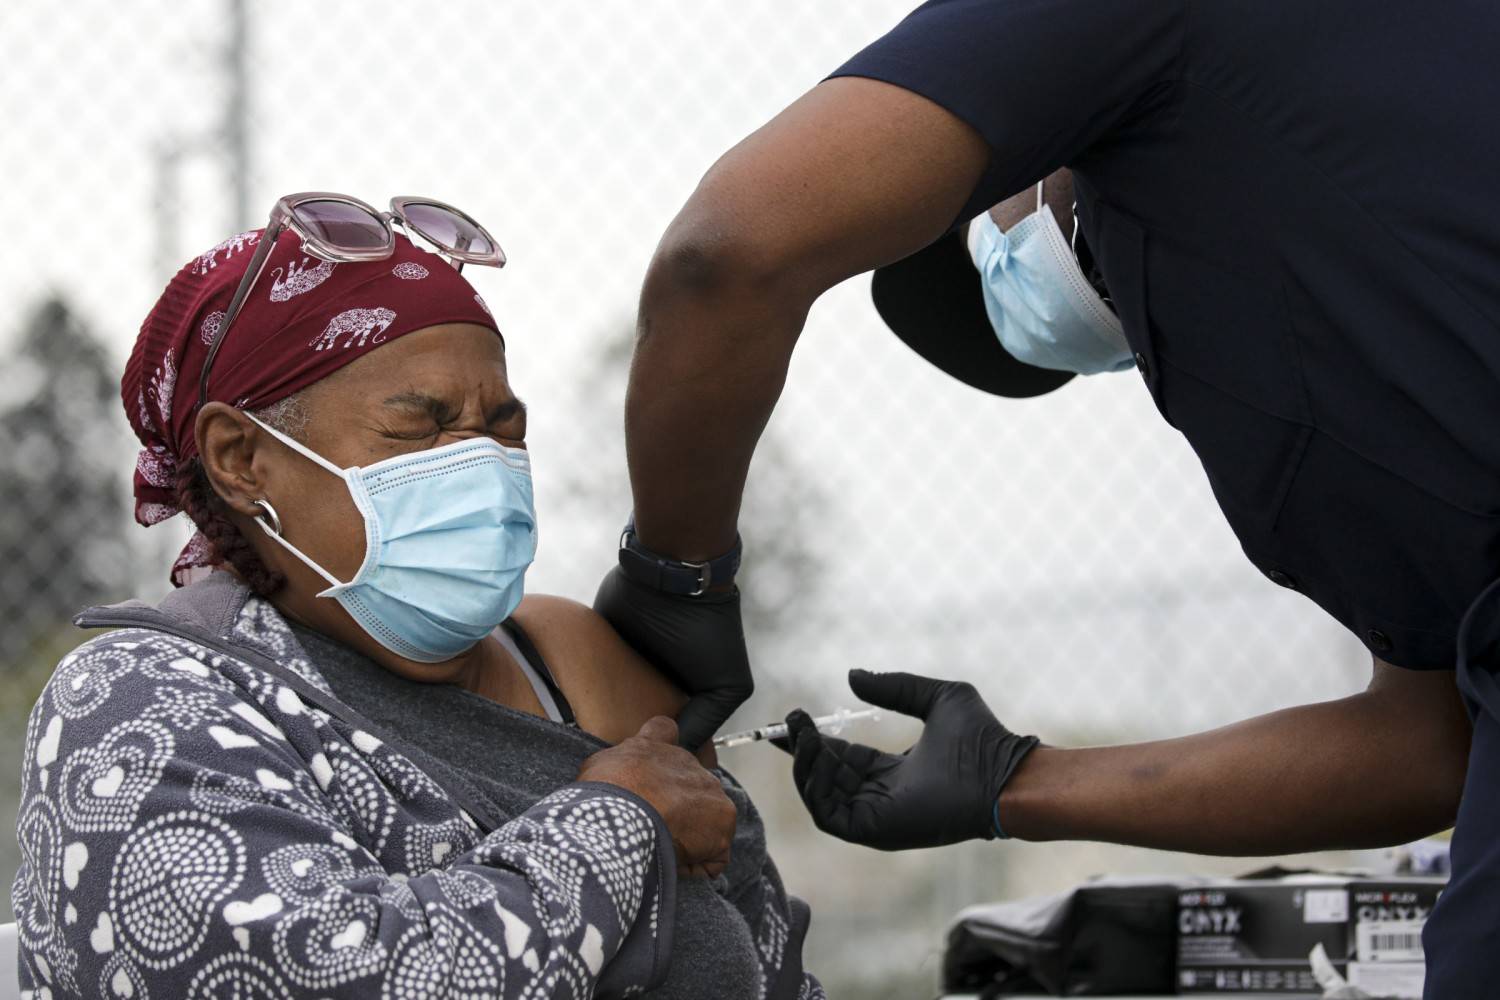 Irfan Khan / Los Angeles Times
Los Angeles firefighter Dion Cooper administers a COVID-19 vaccine to Marilyn Shugars,71, at a mobile vaccination site in Los Angeles. As more Americans line up for the COVID-19 vaccine, some are anxious about the second-dose side effects, which tend to be stronger than the first.